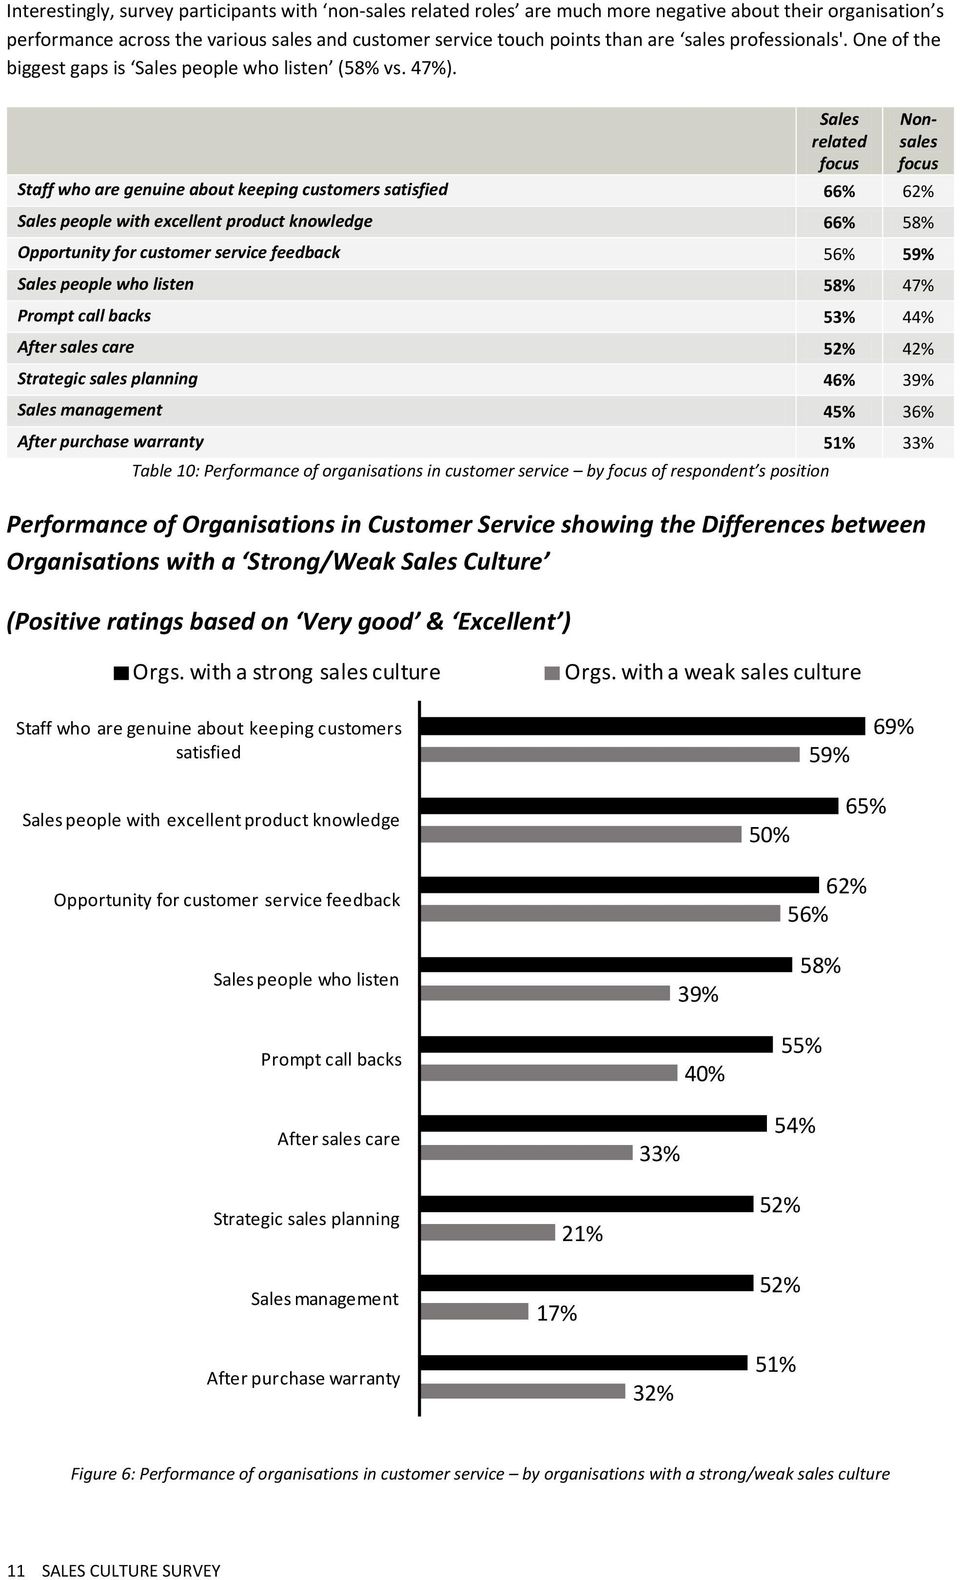 Sales related focus Staff who are genuine about keeping customers satisfied 66% 62% Sales people with excellent product knowledge 66% 58% Opportunity for customer service feedback 56% 59% Sales